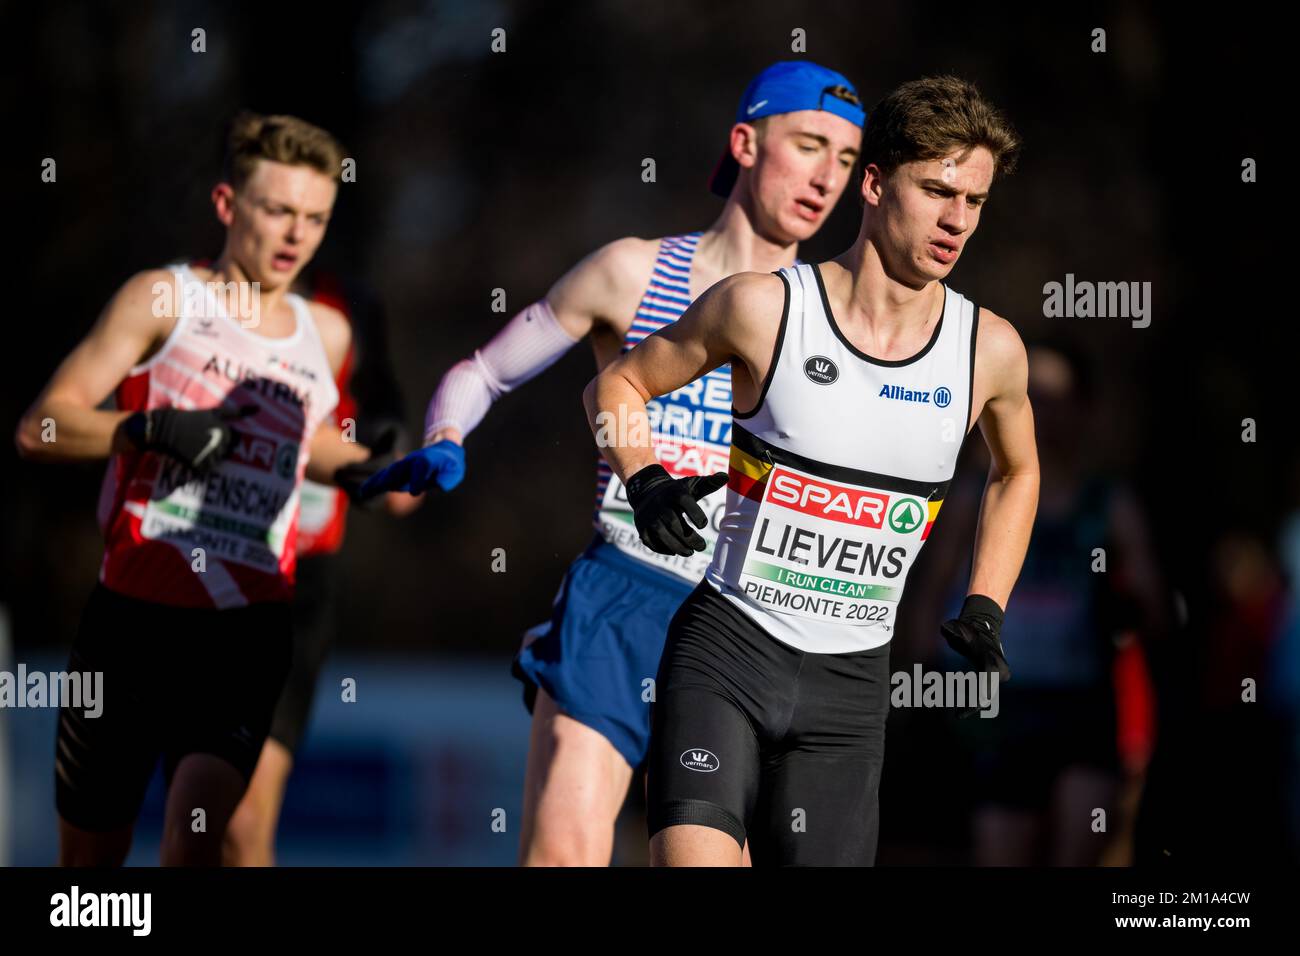 Belgian Mathis Lievens pictured in action during the U20 men's race at the European Cross Country Championships, in Piemonte, Italy, Sunday 11 December 2022. BELGA PHOTO JASPER JACOBS Stock Photo